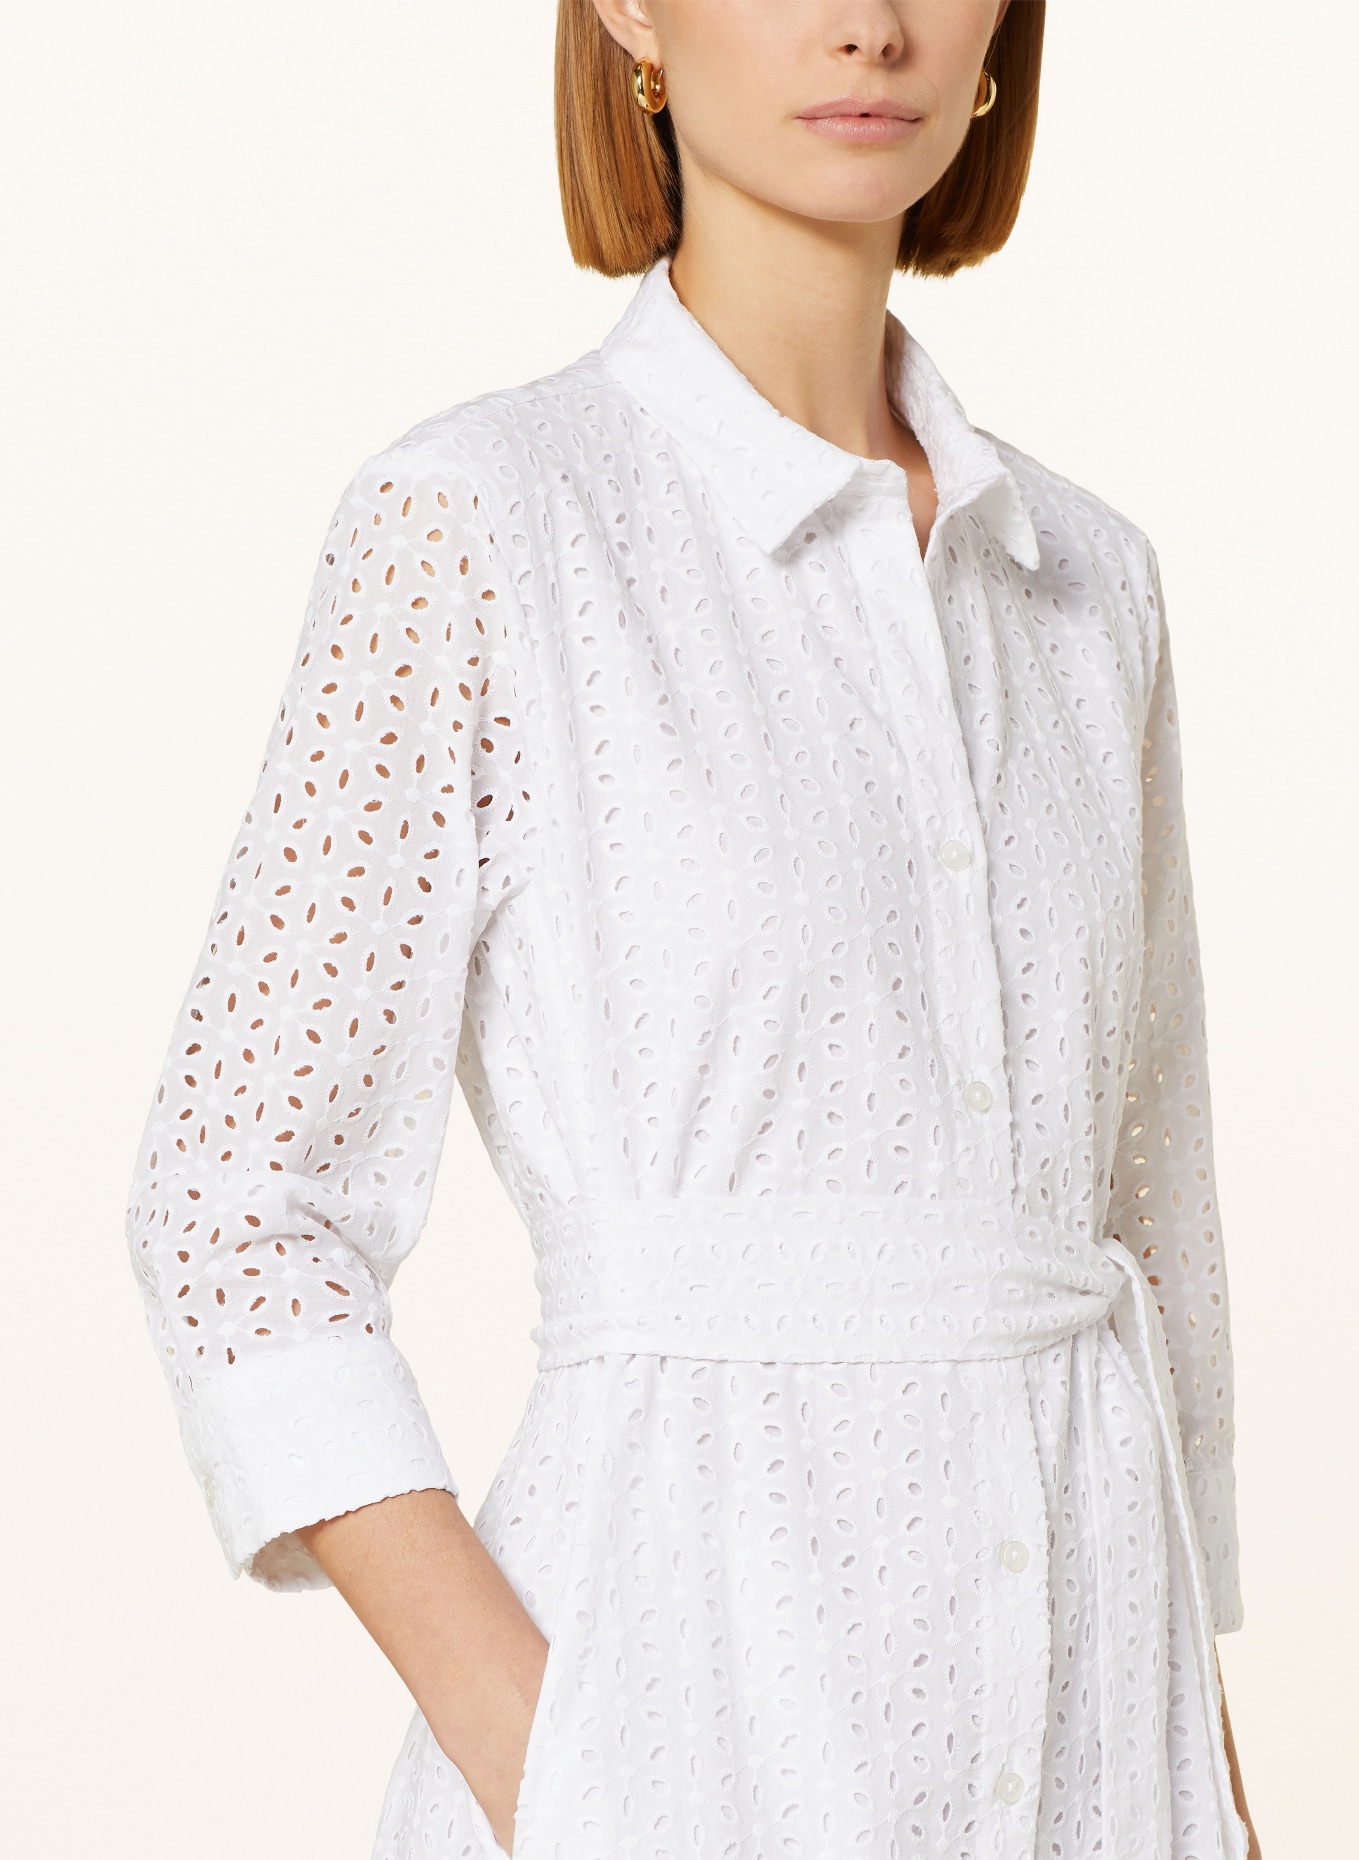 rossana diva Shirt dress in lace, Color: WHITE (Image 4)